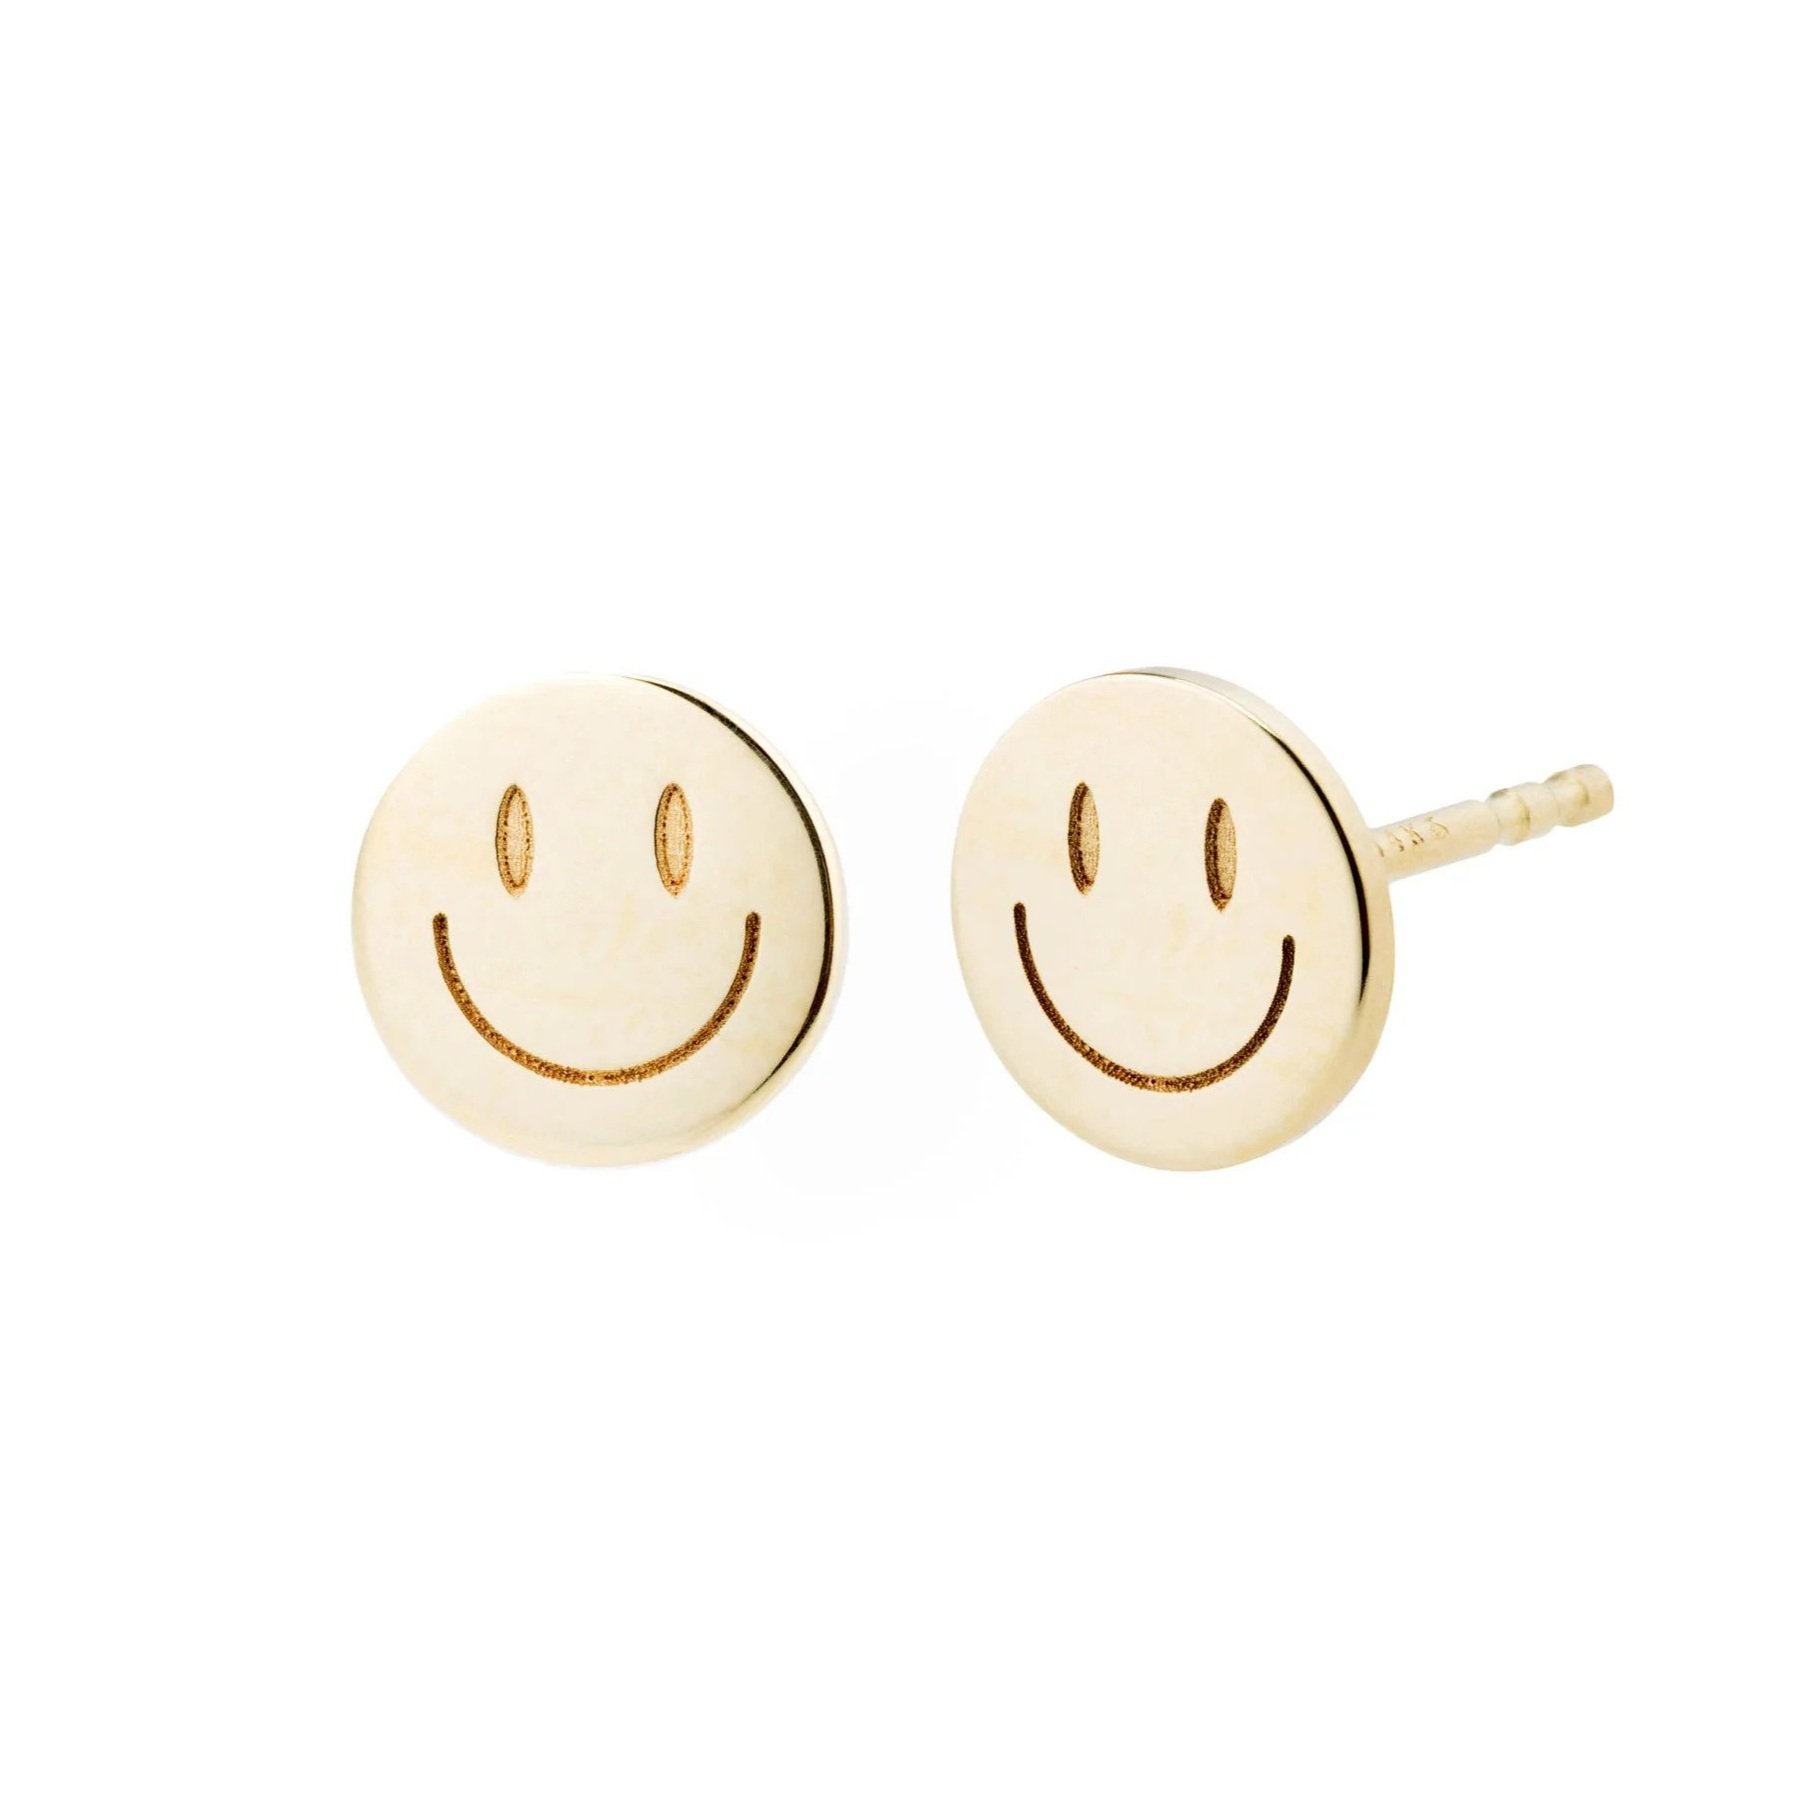 Valerie Madison Fine Jewelry 14K Gold Smiley Studs, $140 at Valerie Madison